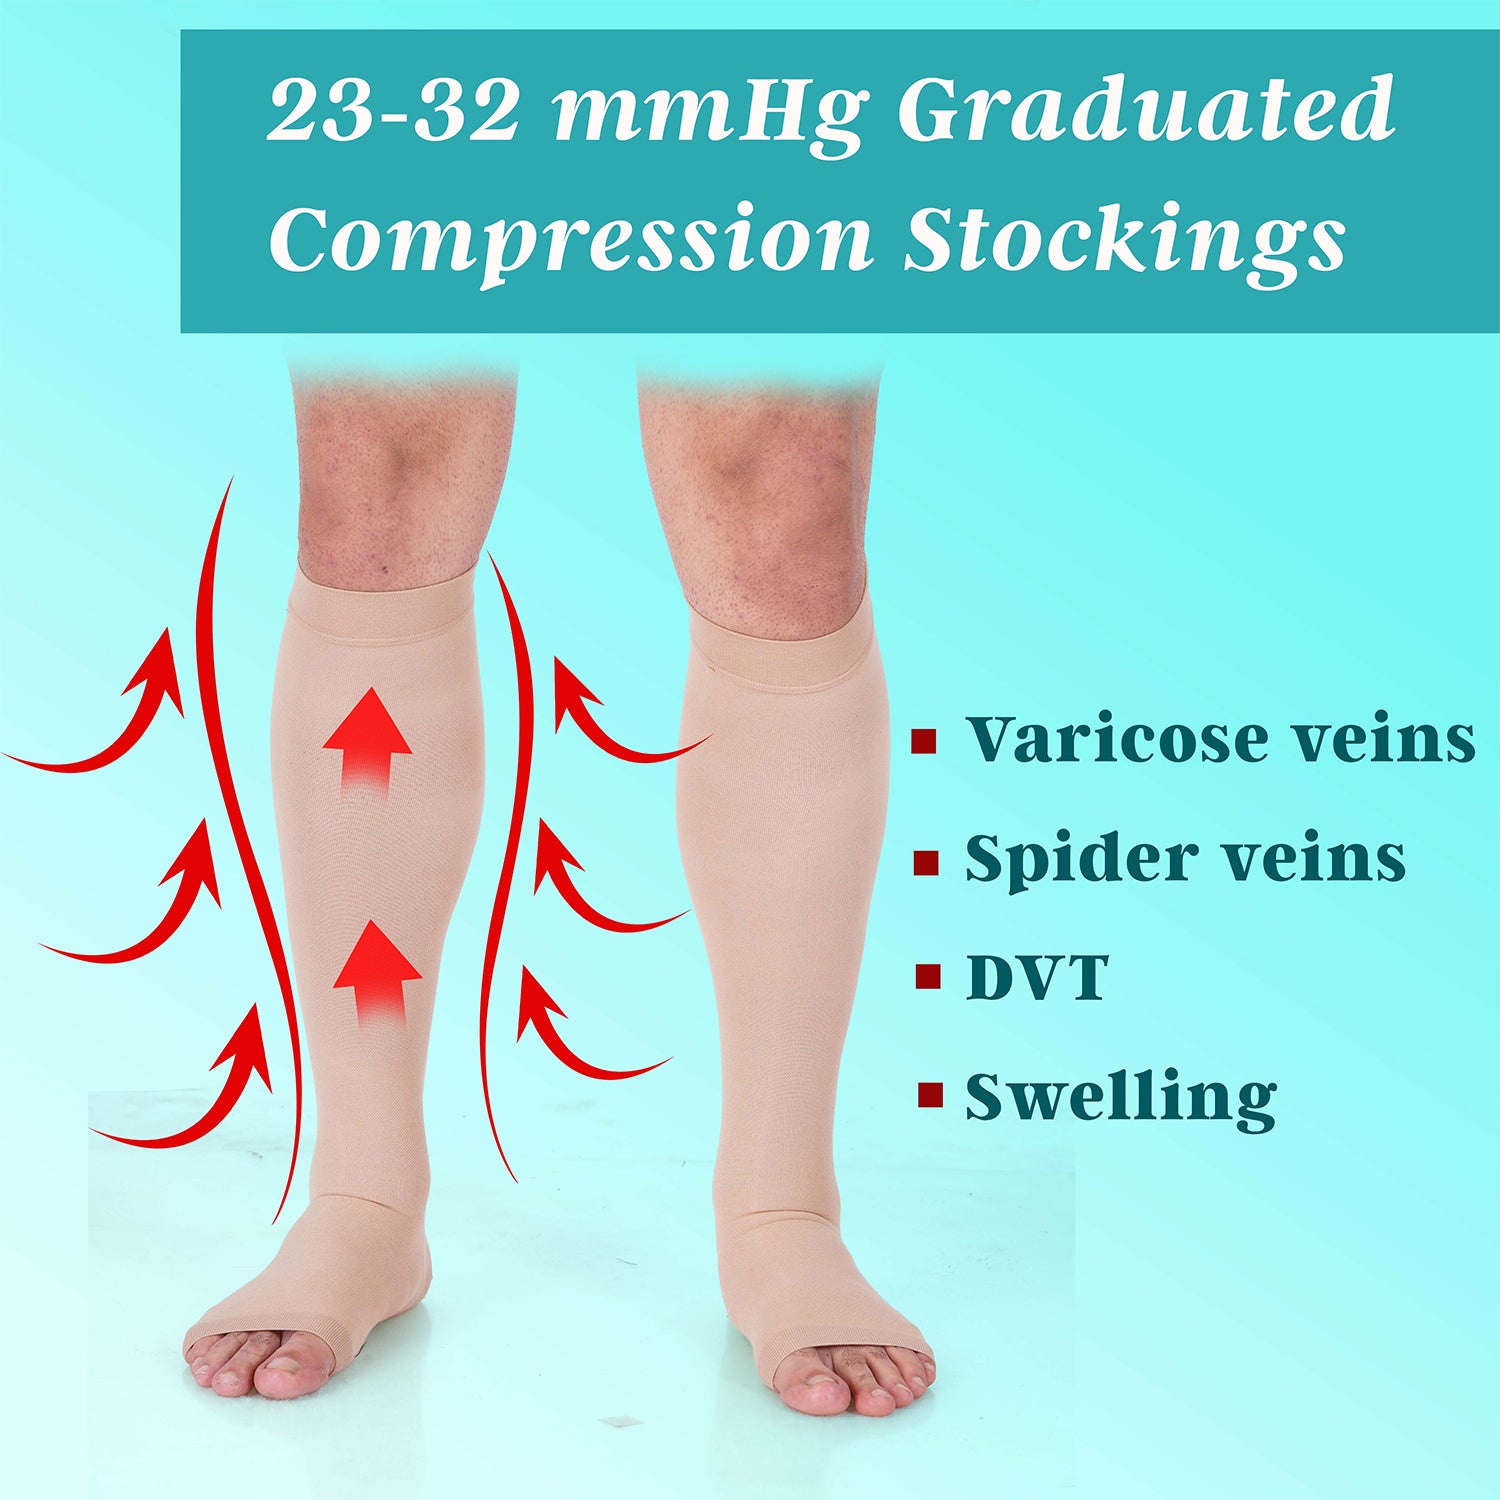 Compression Garments & Stockings for Varicose Veins Tagged 